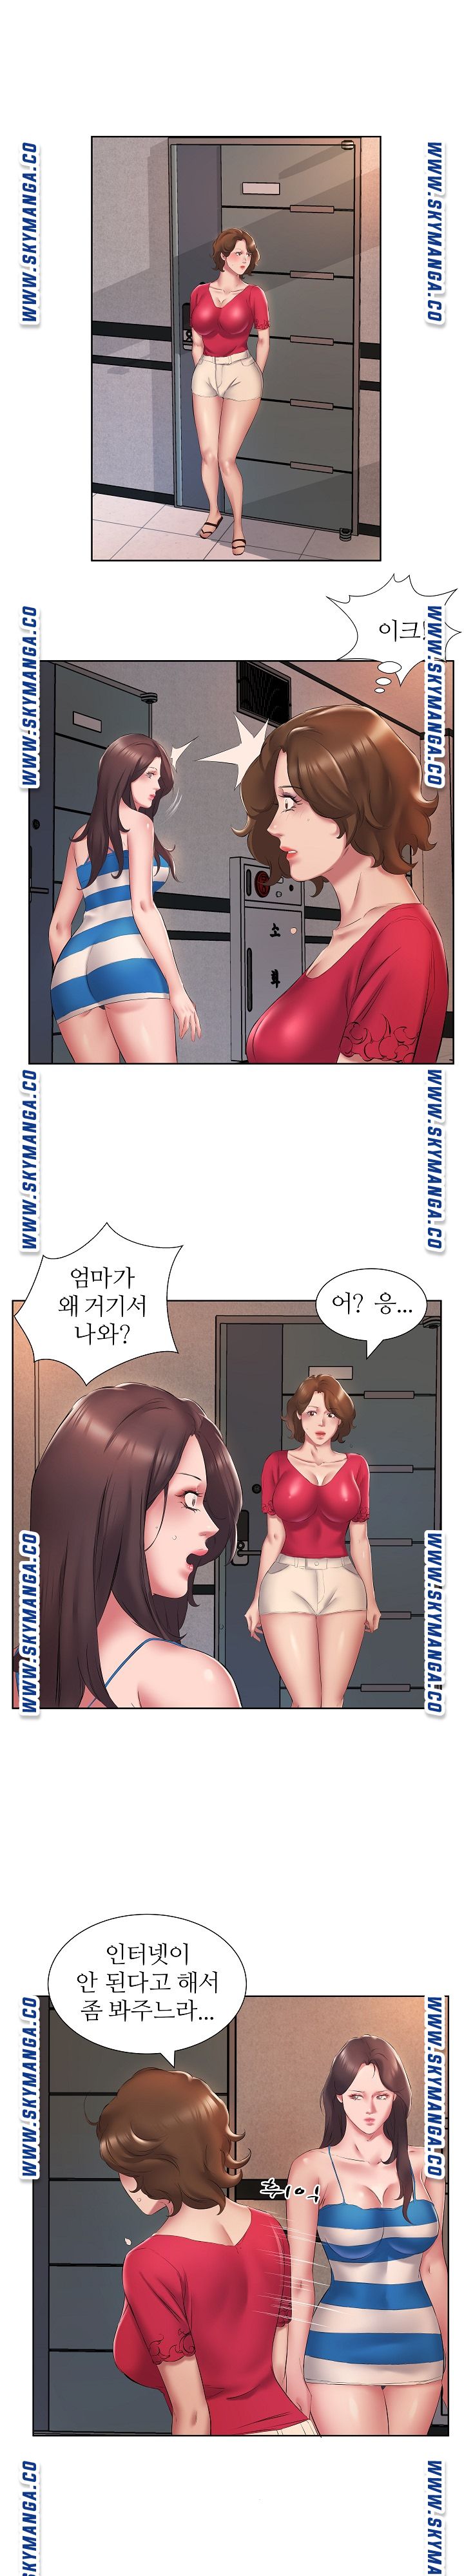 One Room Hotel Raw - Chapter 2 Page 11